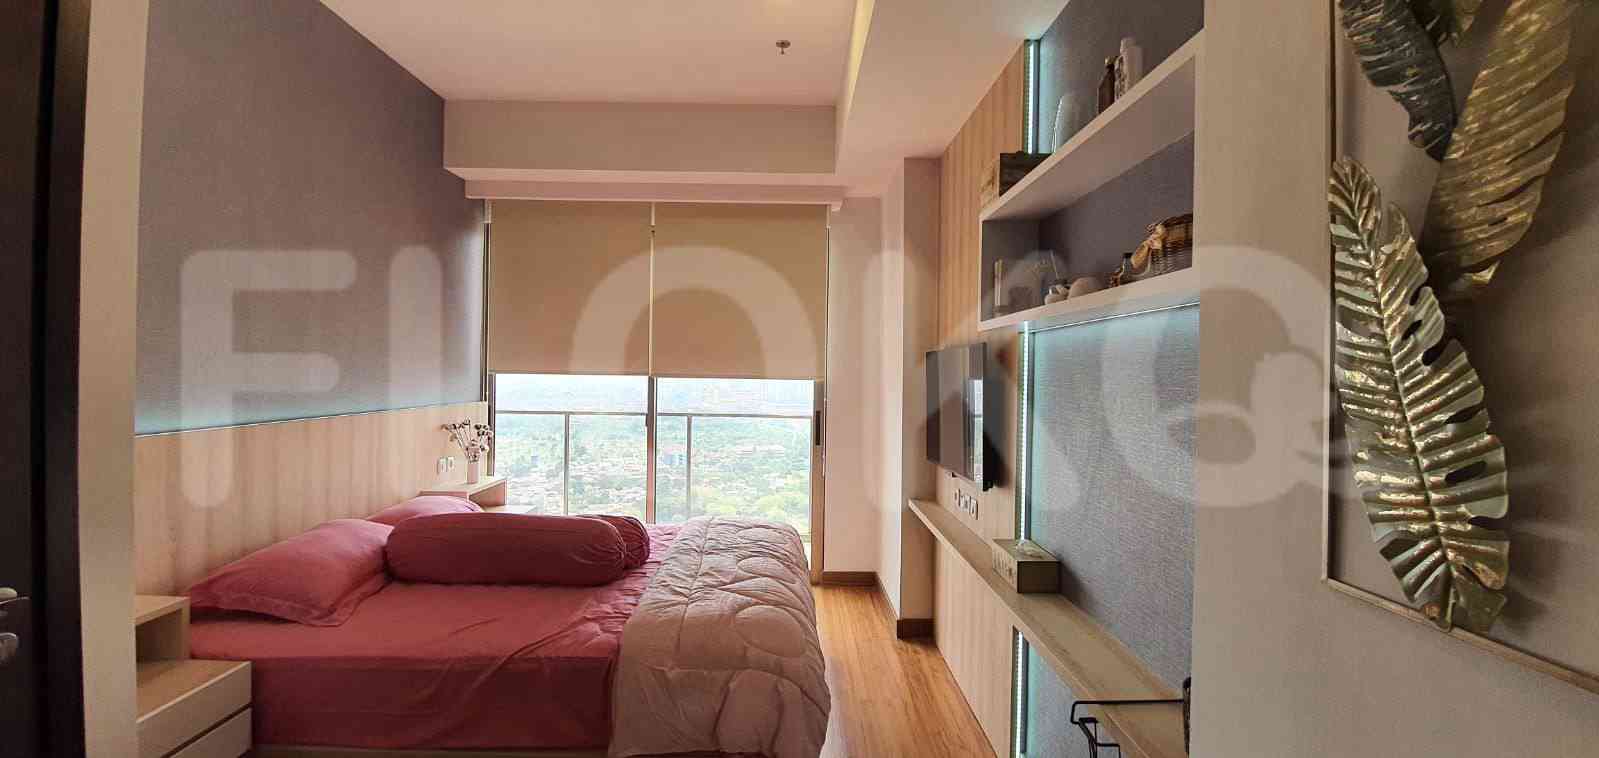 2 Bedroom on 13th Floor for Rent in Sudirman Hill Residences - ftaf11 1